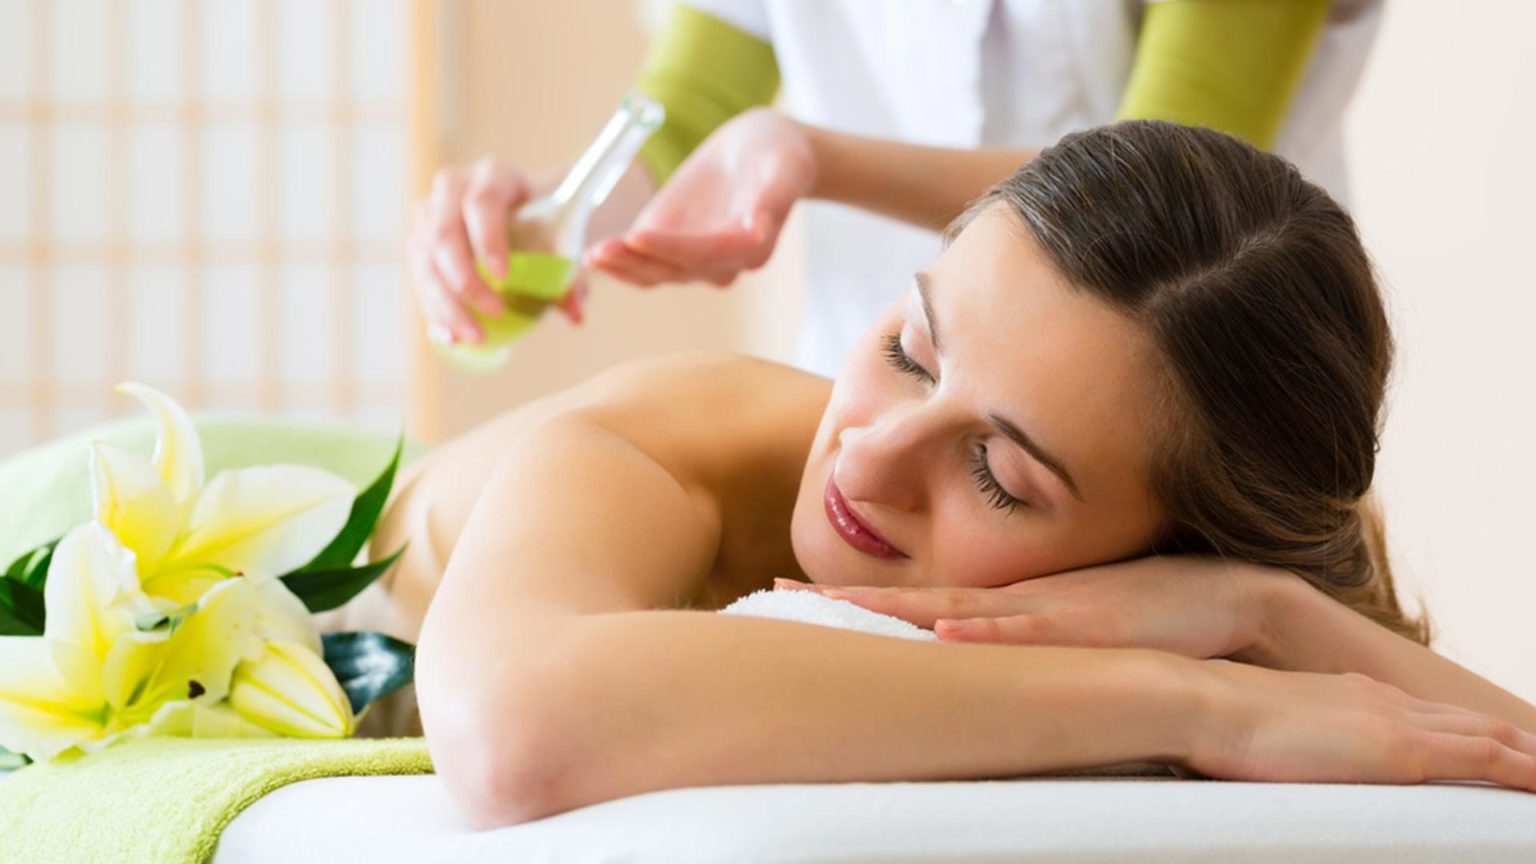 Holistic Well Being Treatments & Packages - Hudson Hay Natural Therapy